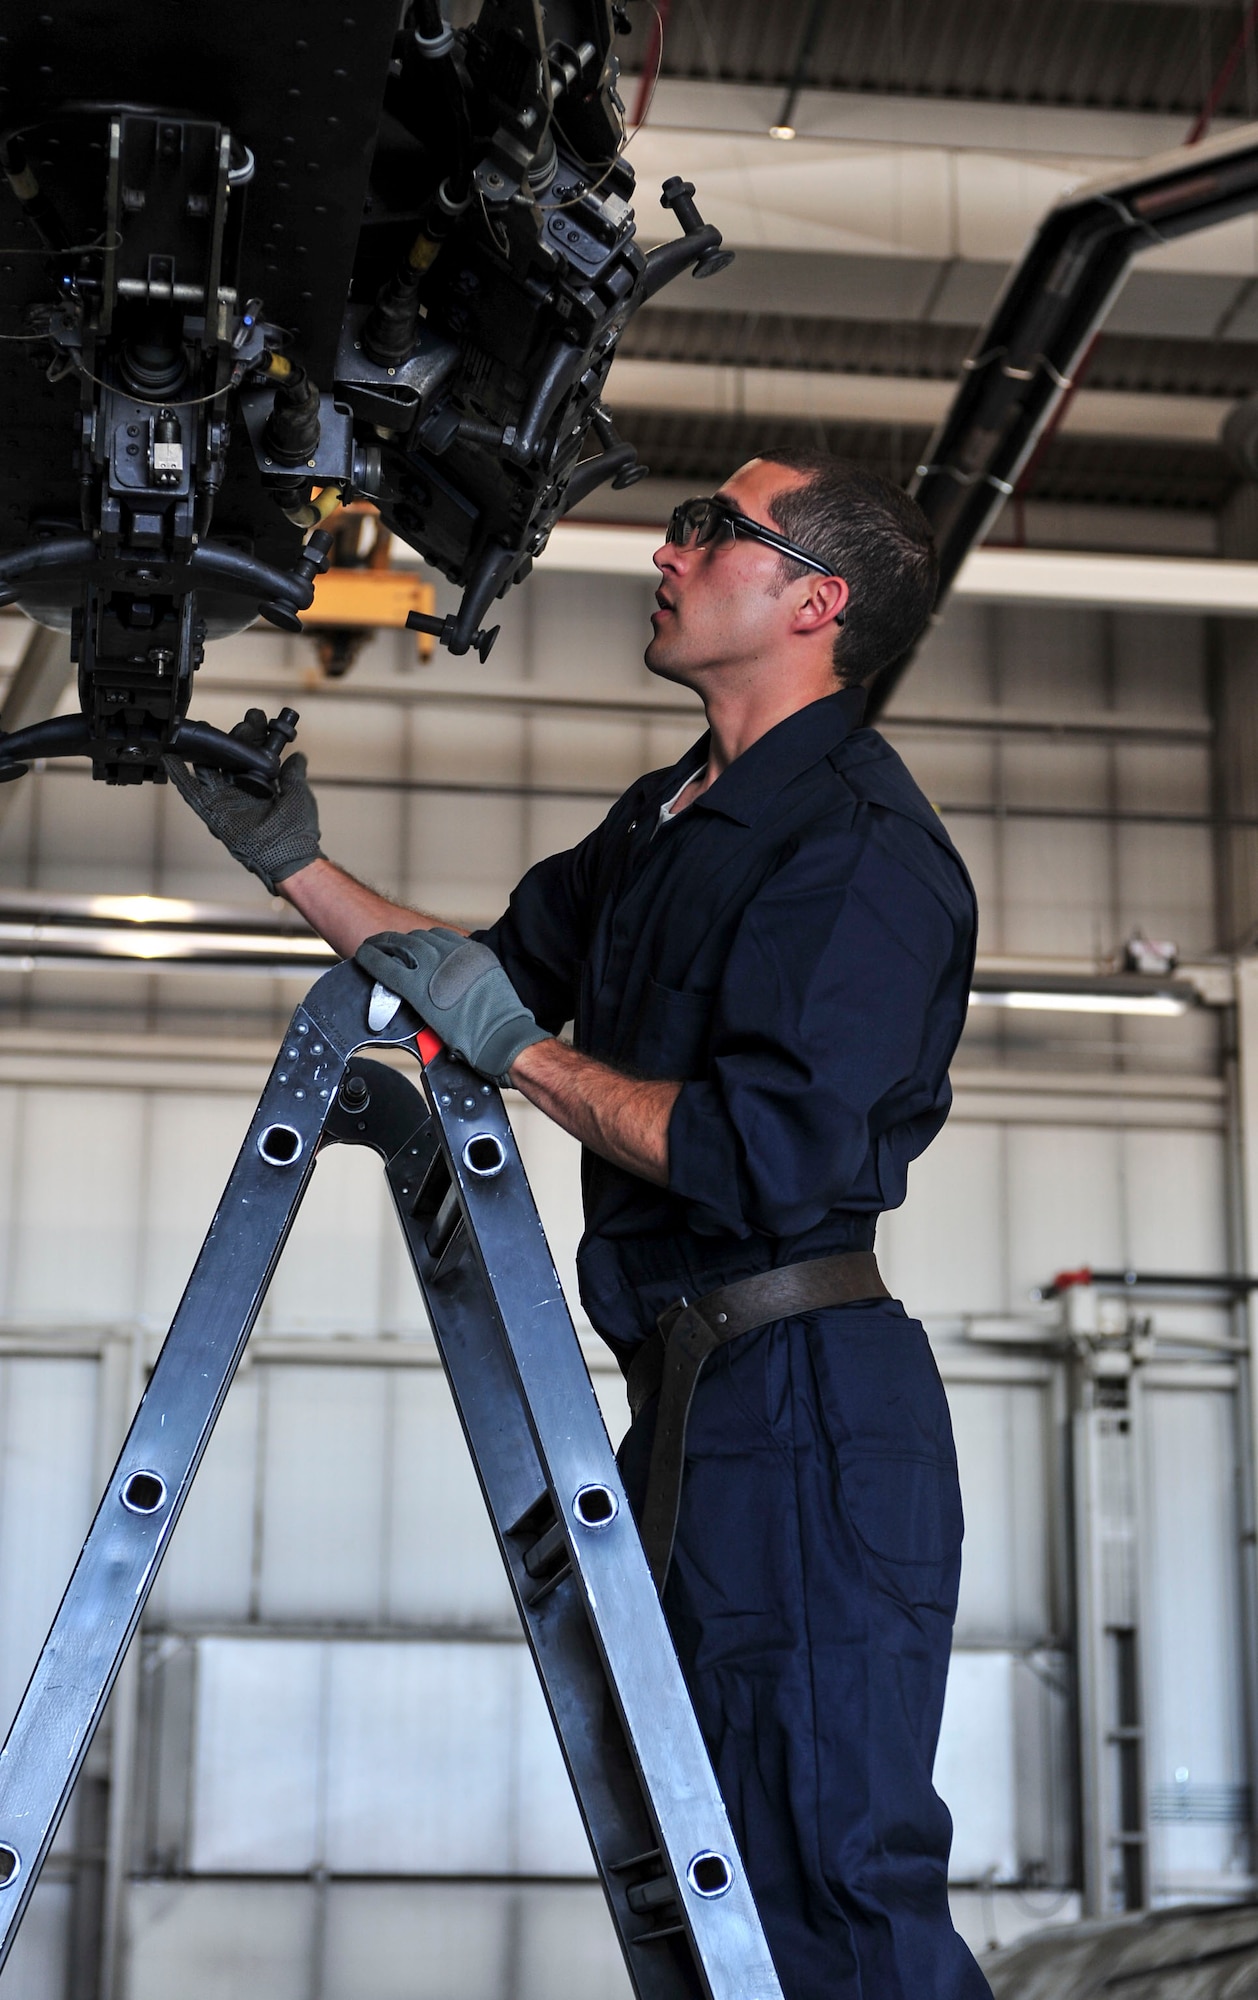 Senior Airman Alex Jimenez, 5th Aircraft Maintenance Squadron weapons load crew member, works with his team to load four weapon systems onto a B-52H Stratofortress at Minot Air Force Base, N.D., Aug. 24, 2015. Jimenez and his team were tested on their ability to quickly, safely and effectively load the weapons as part of Air Force Global Strike Command’s Global Strike Challenge Competition. (U.S. Air Force photo/Senior Airman Stephanie Morris)